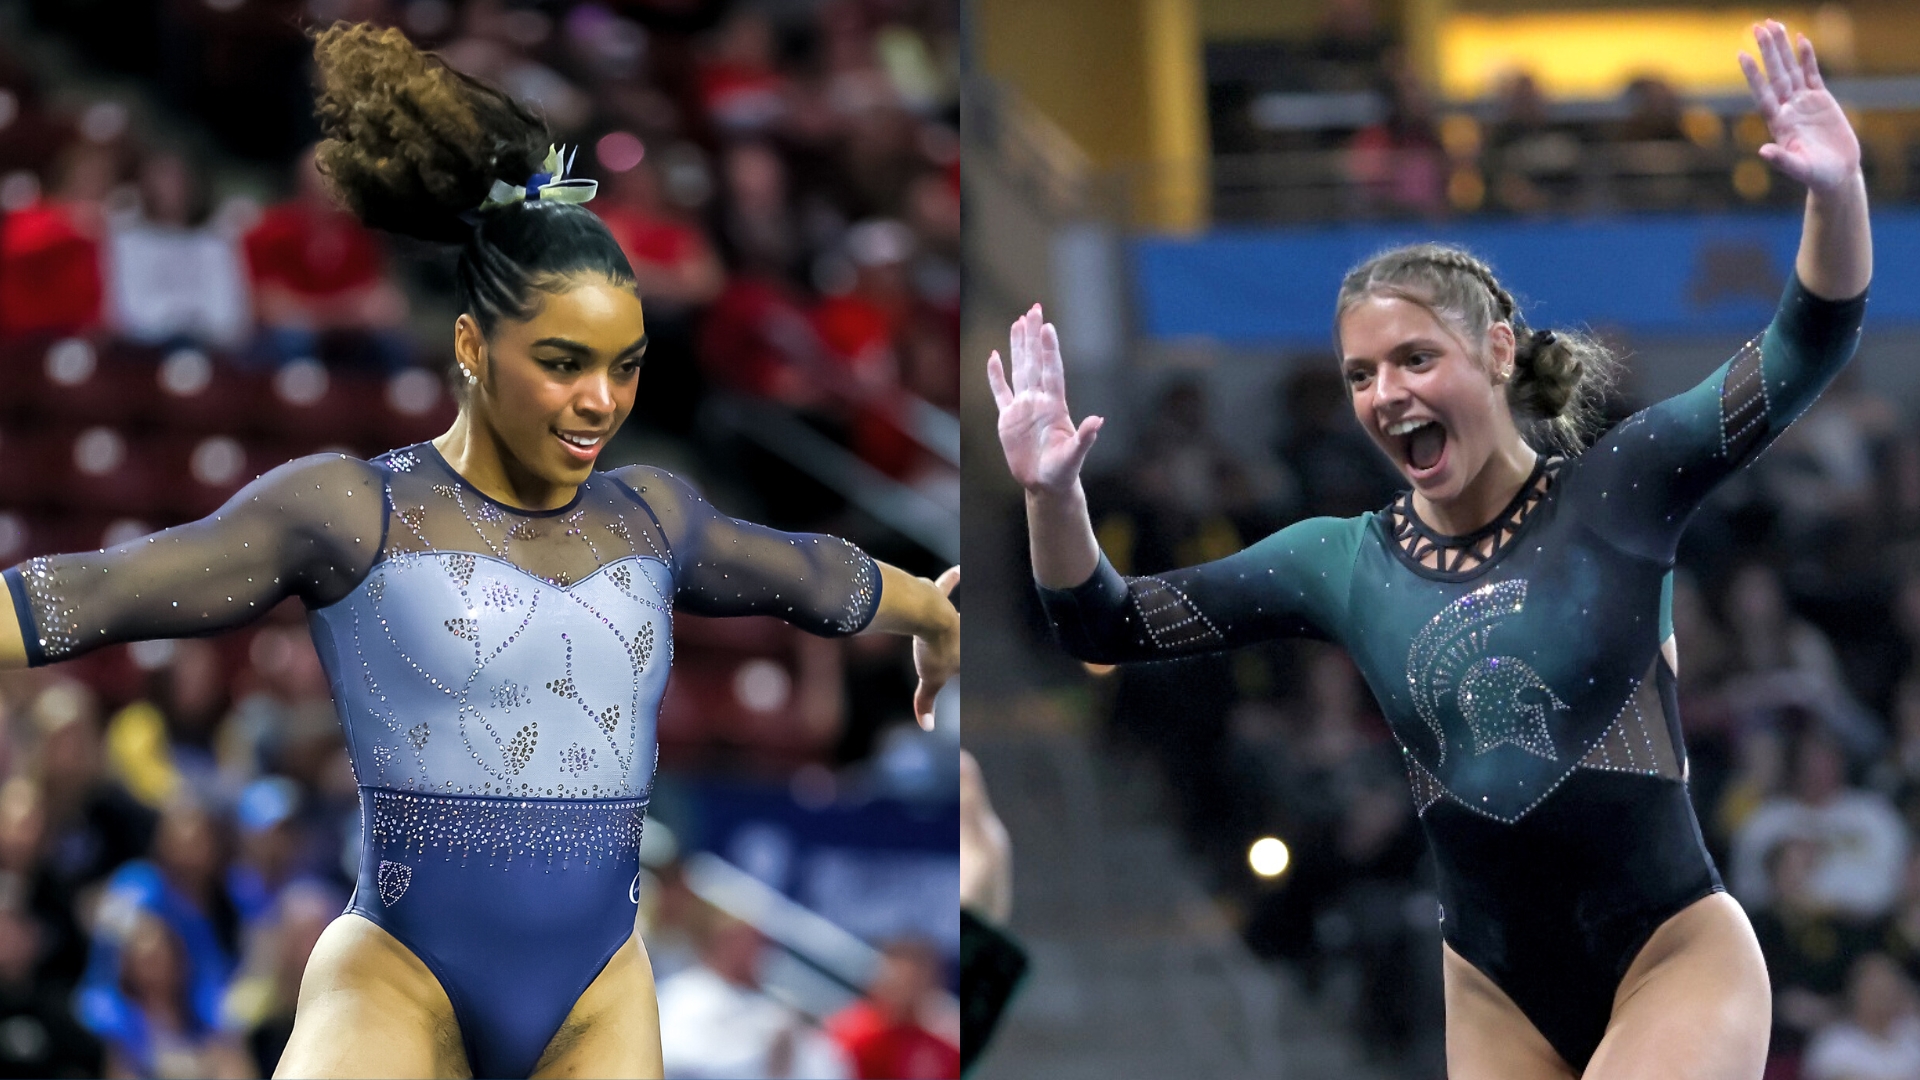 Cal's eMjae Frazier in the "Napa" leo, and Michigan State's Sage Kellerman in the "Smoke & Mirrors" leo.